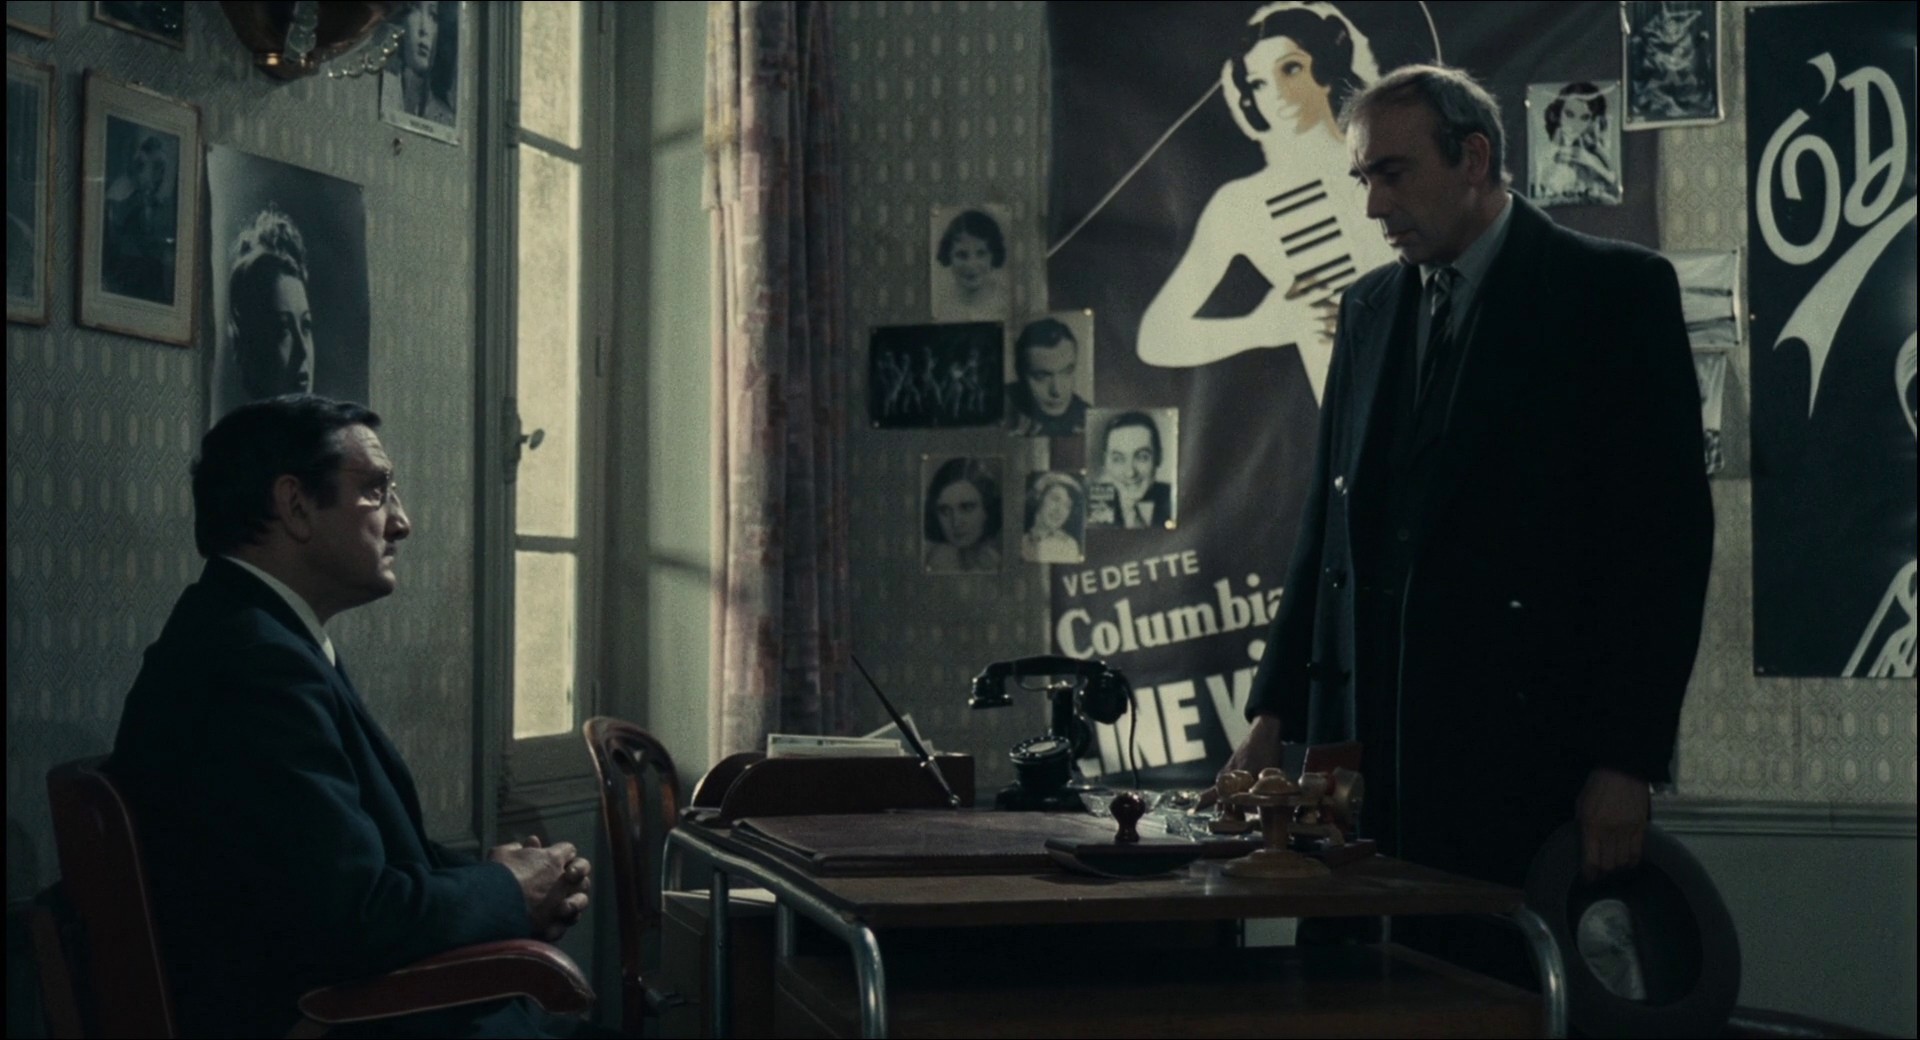 Screenshot of the film Army of Shadows (L'Armee des ombres), featuring with two sharp-suited men.